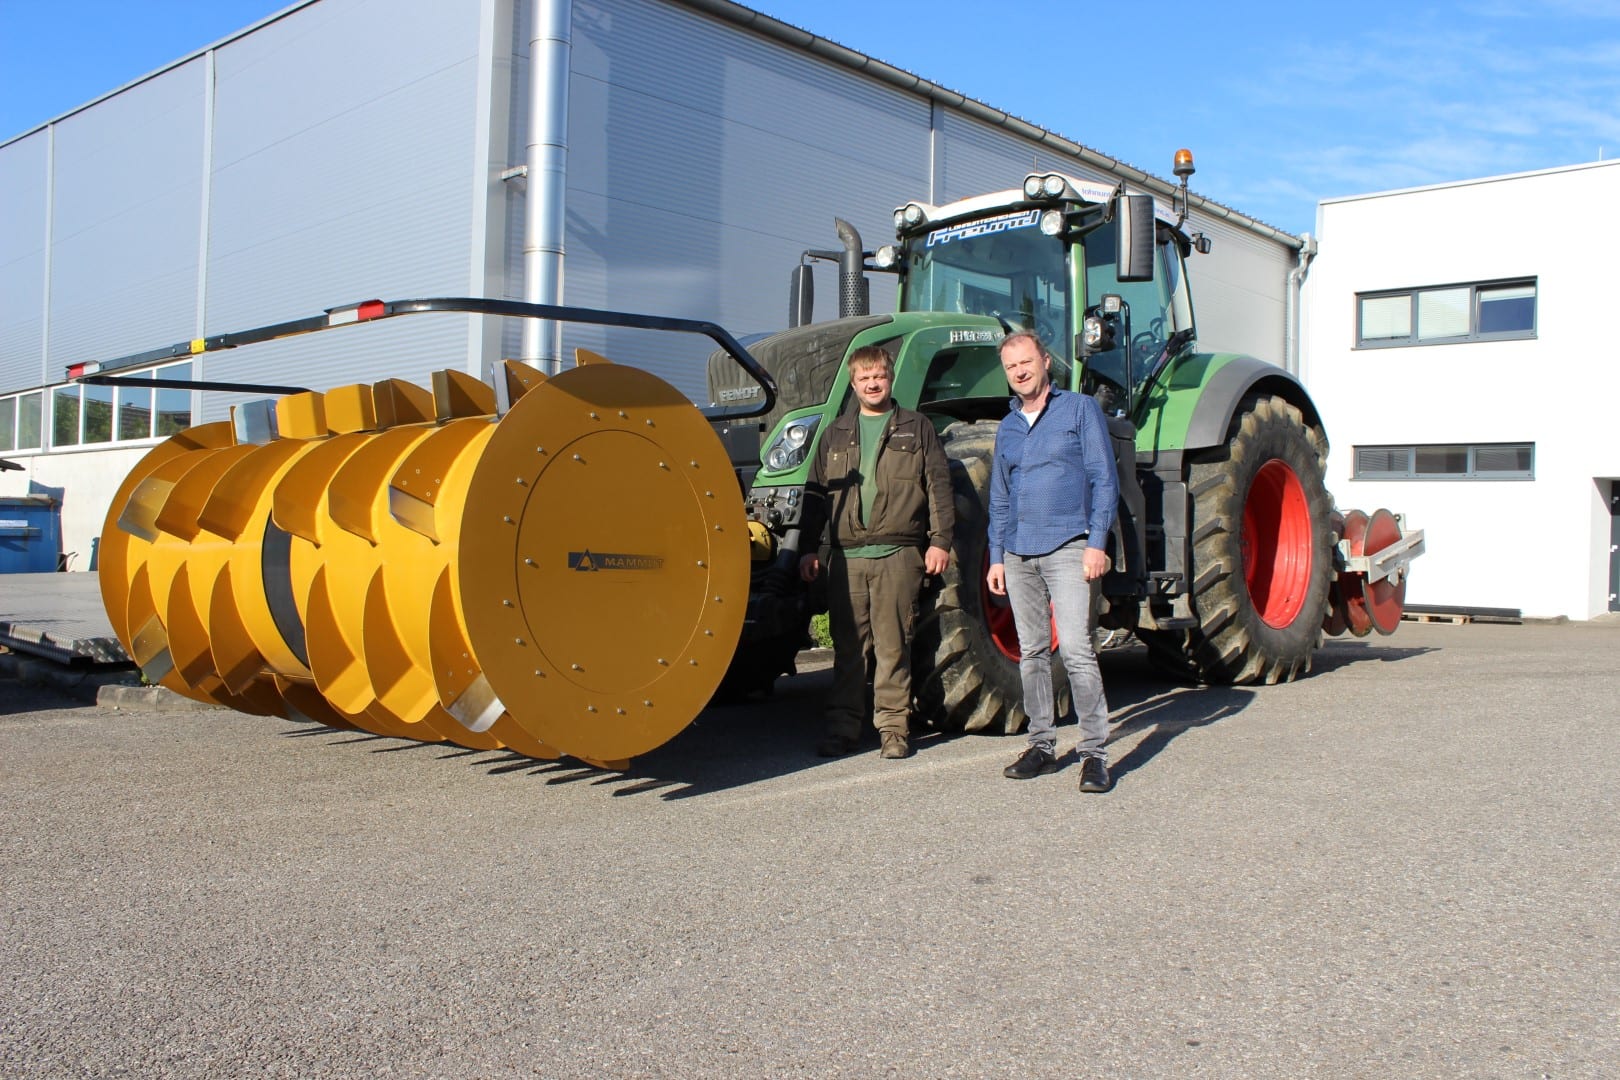 Freund agricultural contractor, Eitzing, Ried im Innkreis district